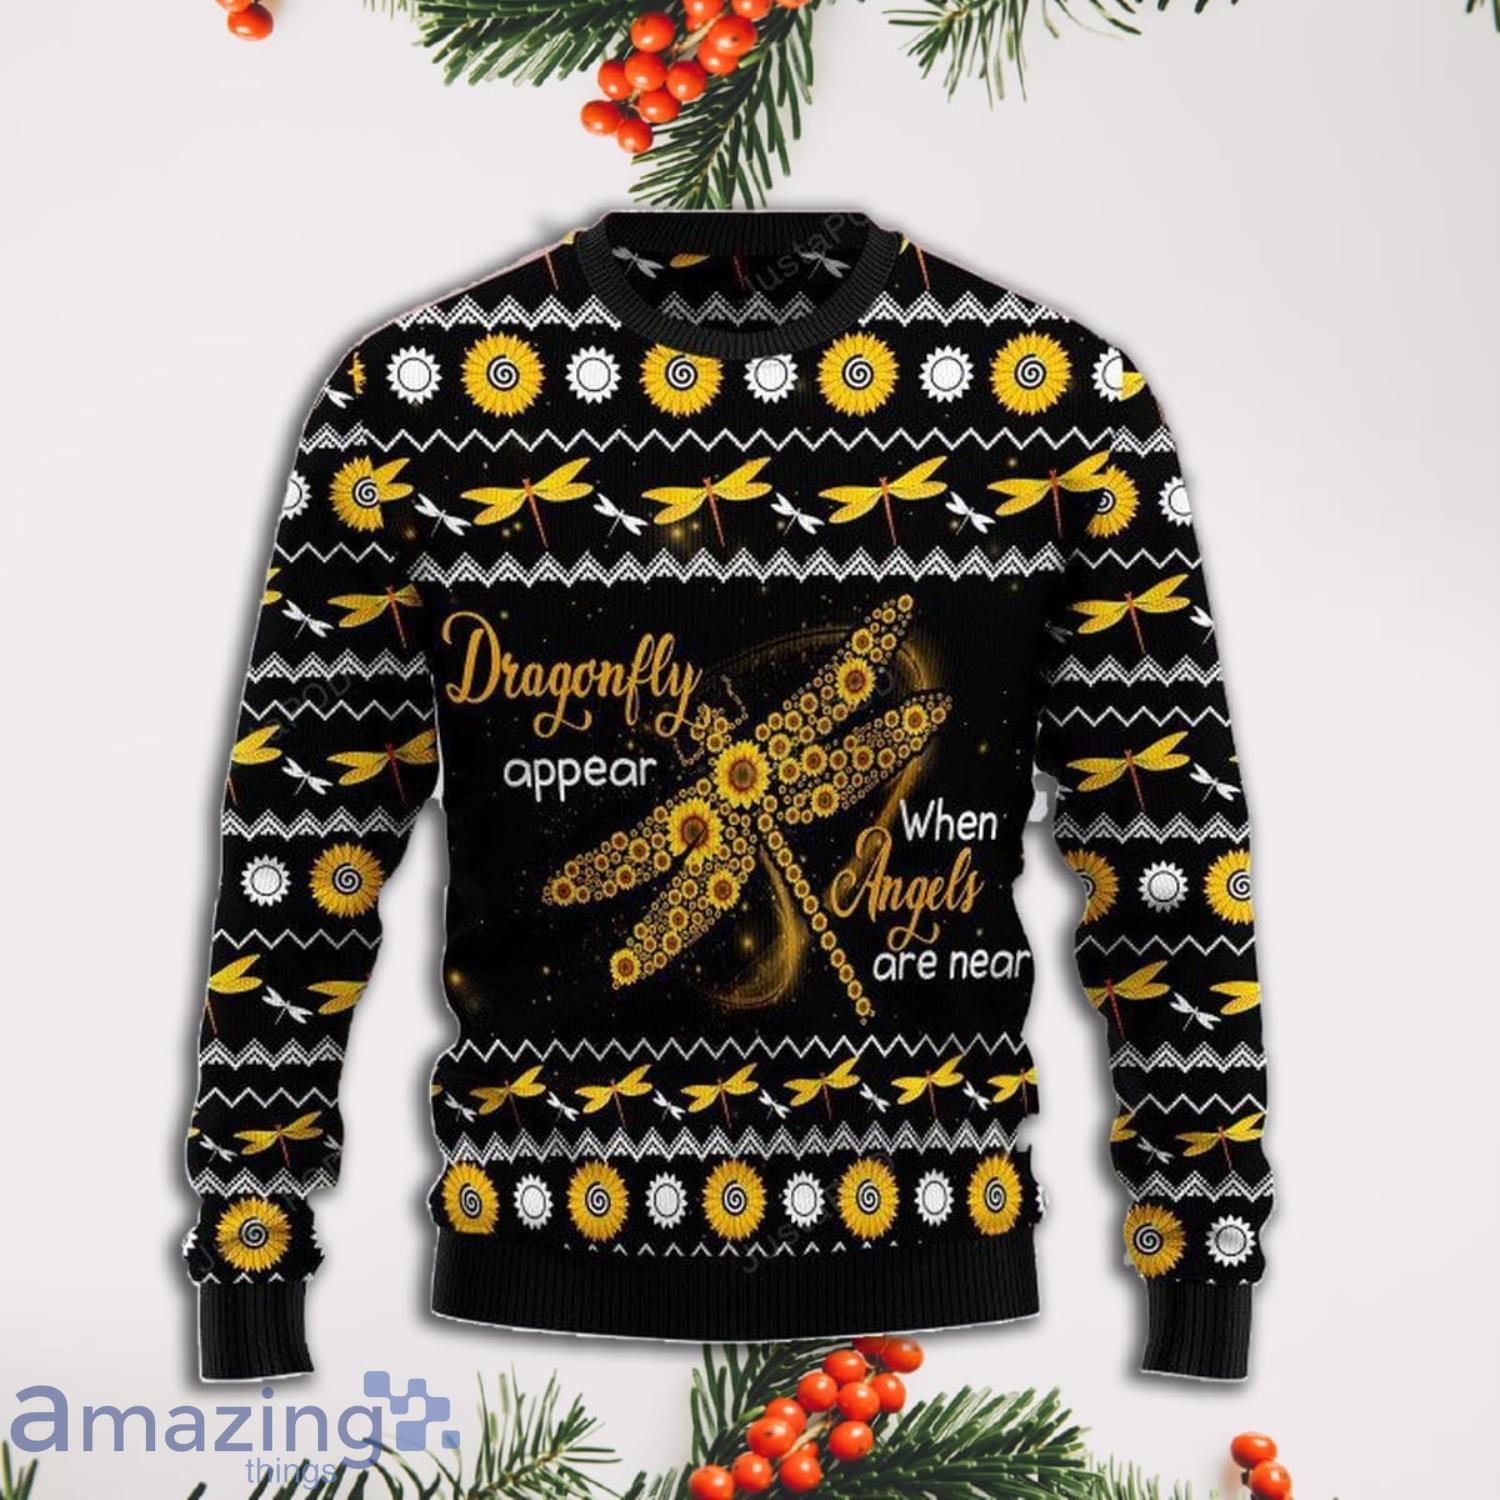 DragonfLy SunfLower All Over Print Ugly Christmas Sweater Product Photo 1